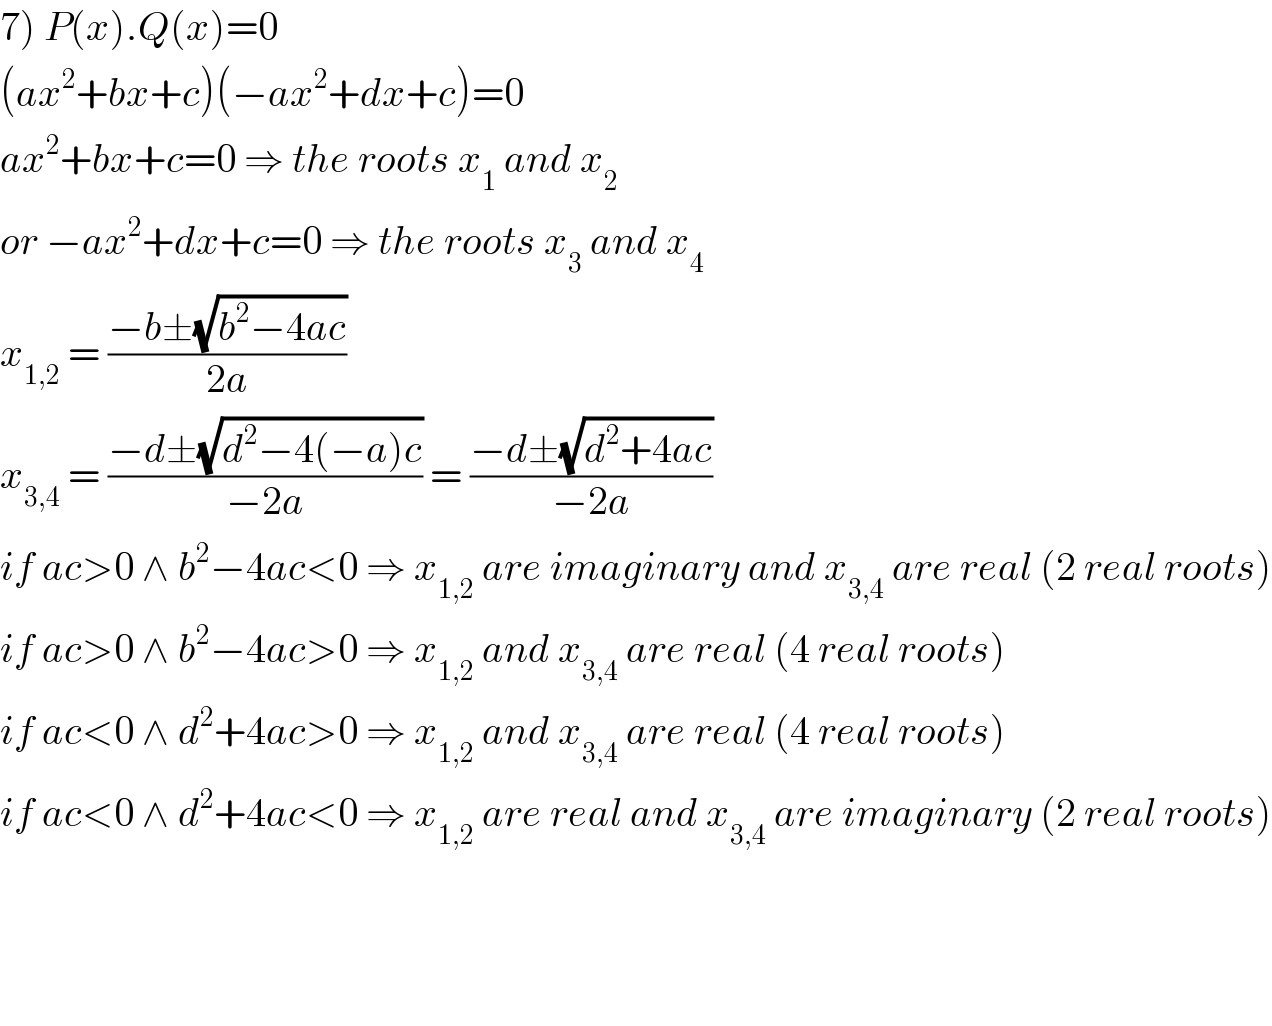 7) P(x).Q(x)=0  (ax^2 +bx+c)(−ax^2 +dx+c)=0  ax^2 +bx+c=0 ⇒ the roots x_1  and x_2   or −ax^2 +dx+c=0 ⇒ the roots x_3  and x_4   x_(1,2)  = ((−b±(√(b^2 −4ac)))/(2a))   x_(3,4)  = ((−d±(√(d^2 −4(−a)c)))/(−2a)) = ((−d±(√(d^2 +4ac)))/(−2a))   if ac>0 ∧ b^2 −4ac<0 ⇒ x_(1,2)  are imaginary and x_(3,4)  are real (2 real roots)  if ac>0 ∧ b^2 −4ac>0 ⇒ x_(1,2)  and x_(3,4)  are real (4 real roots)  if ac<0 ∧ d^2 +4ac>0 ⇒ x_(1,2)  and x_(3,4)  are real (4 real roots)  if ac<0 ∧ d^2 +4ac<0 ⇒ x_(1,2)  are real and x_(3,4)  are imaginary (2 real roots)        